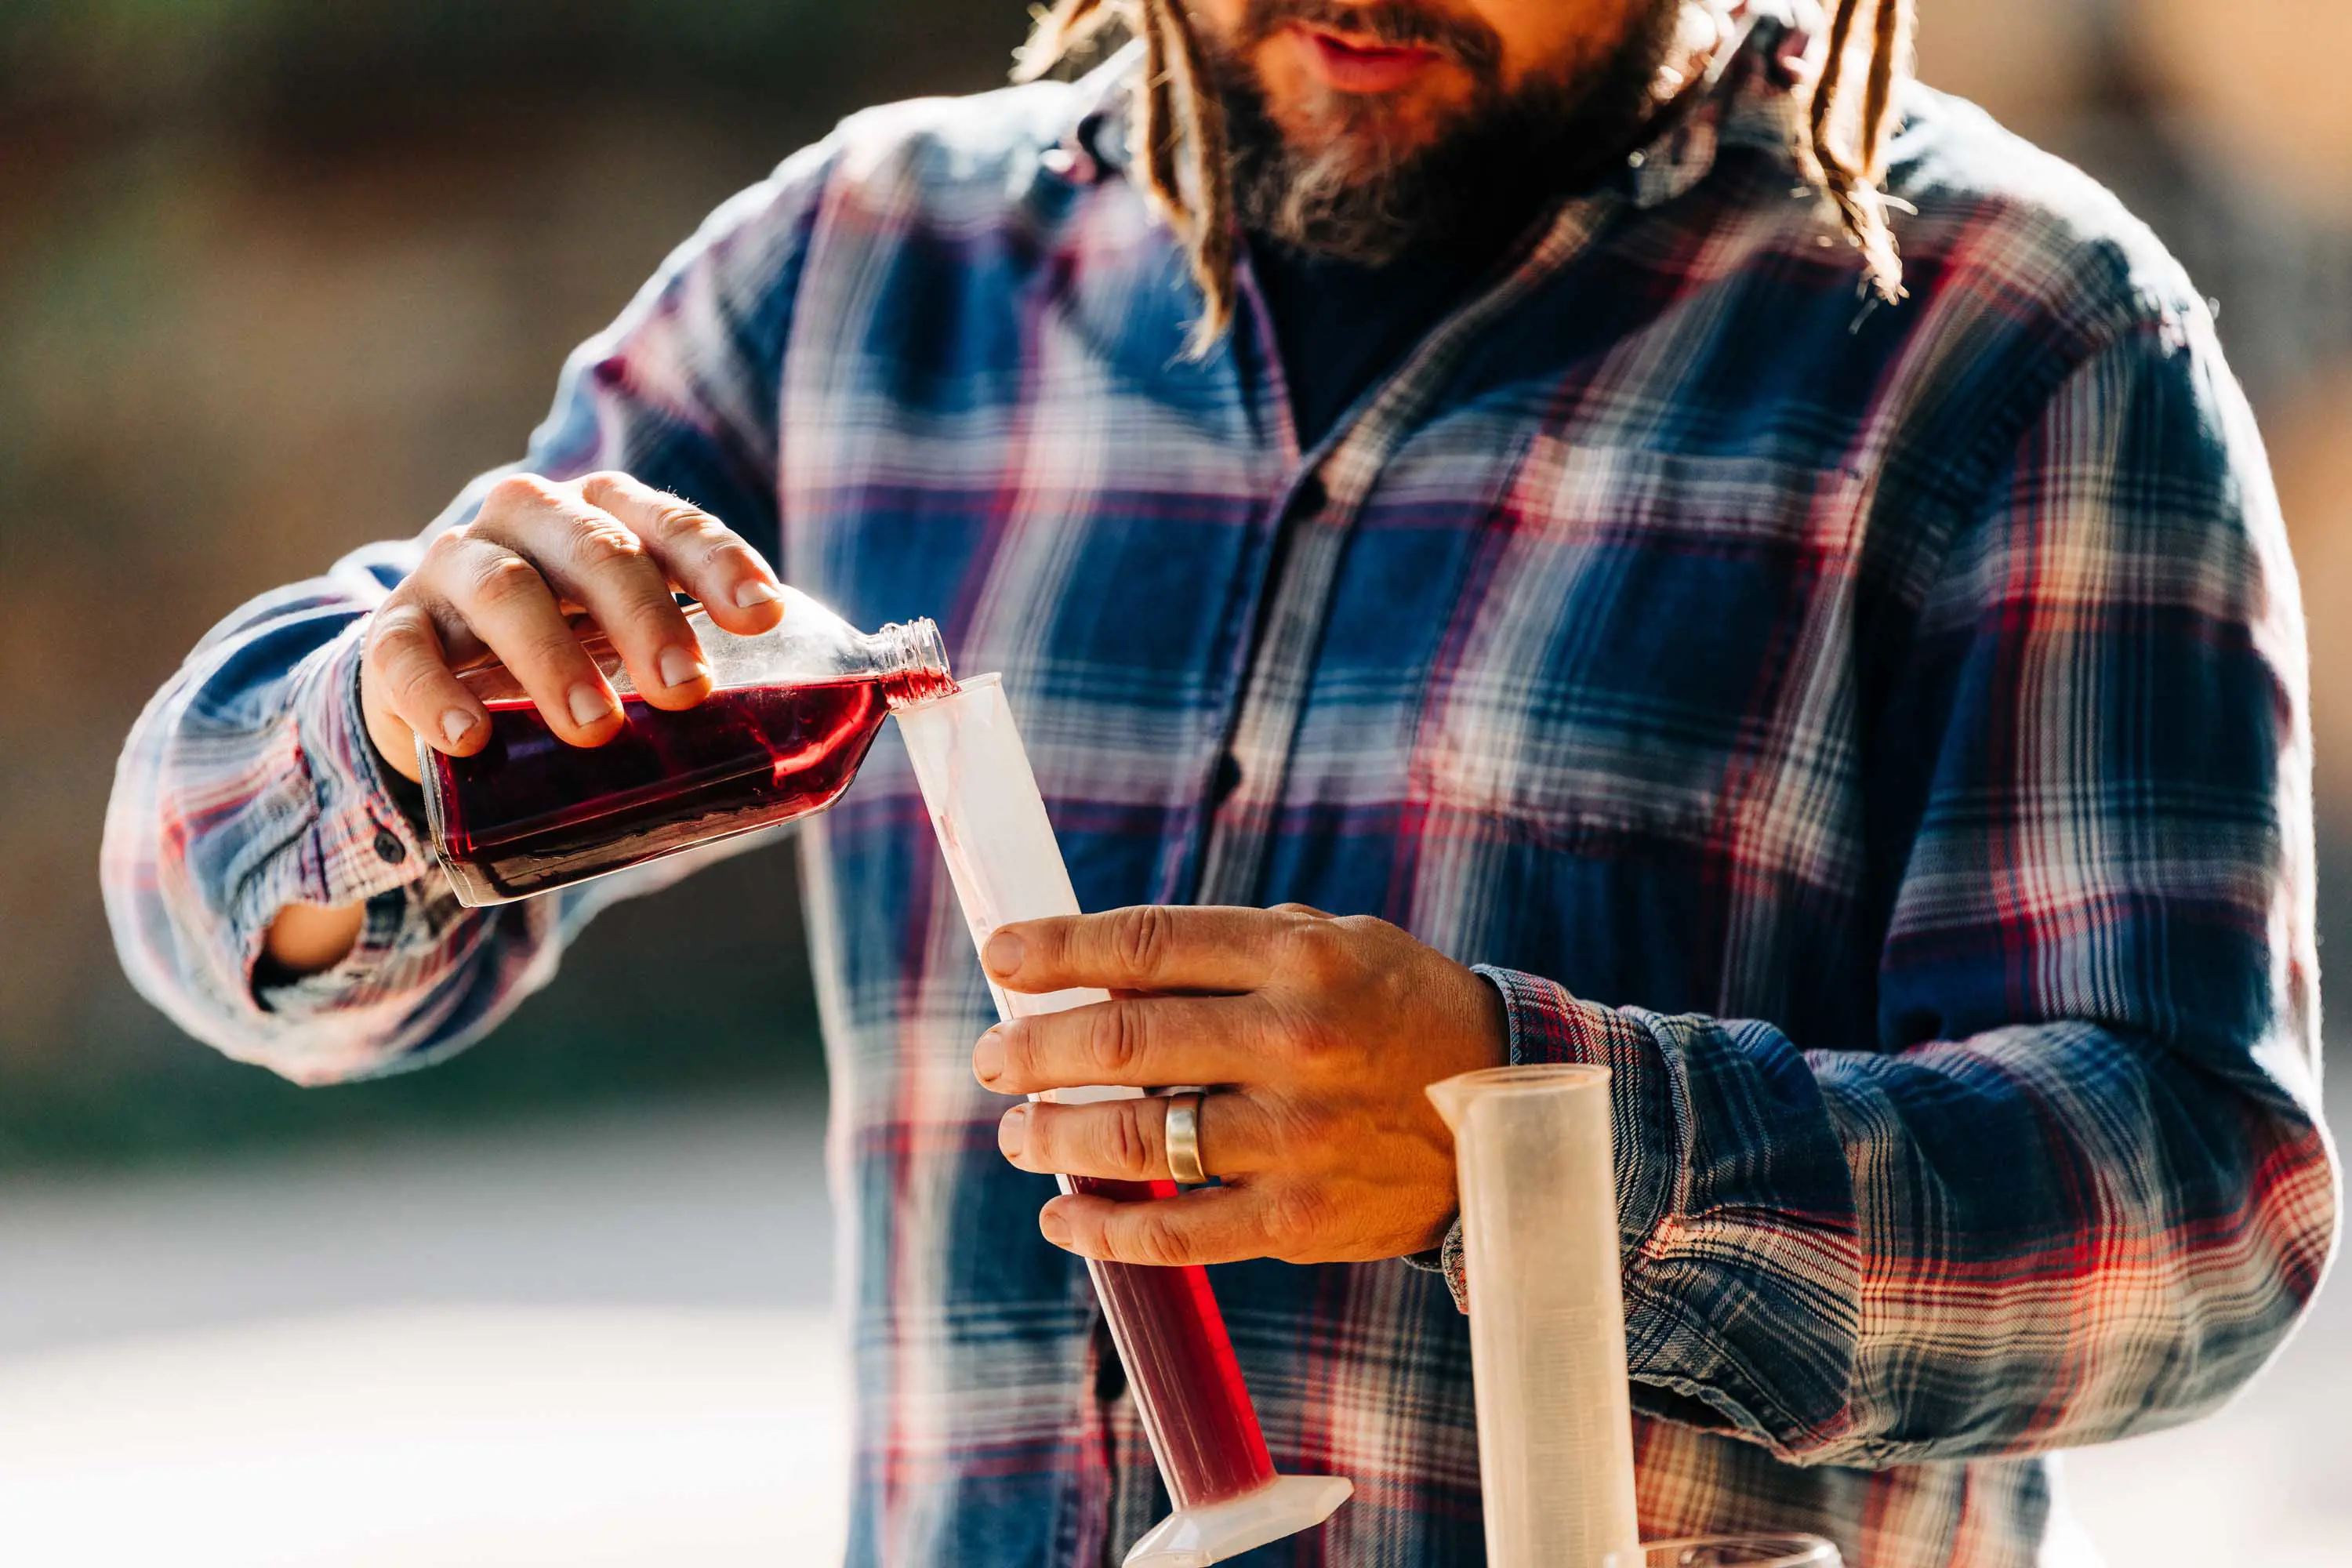 A young man with a beard, wearing a blue and red tartan shirt pours red wine from a small bottle into a measuring pitcher.  